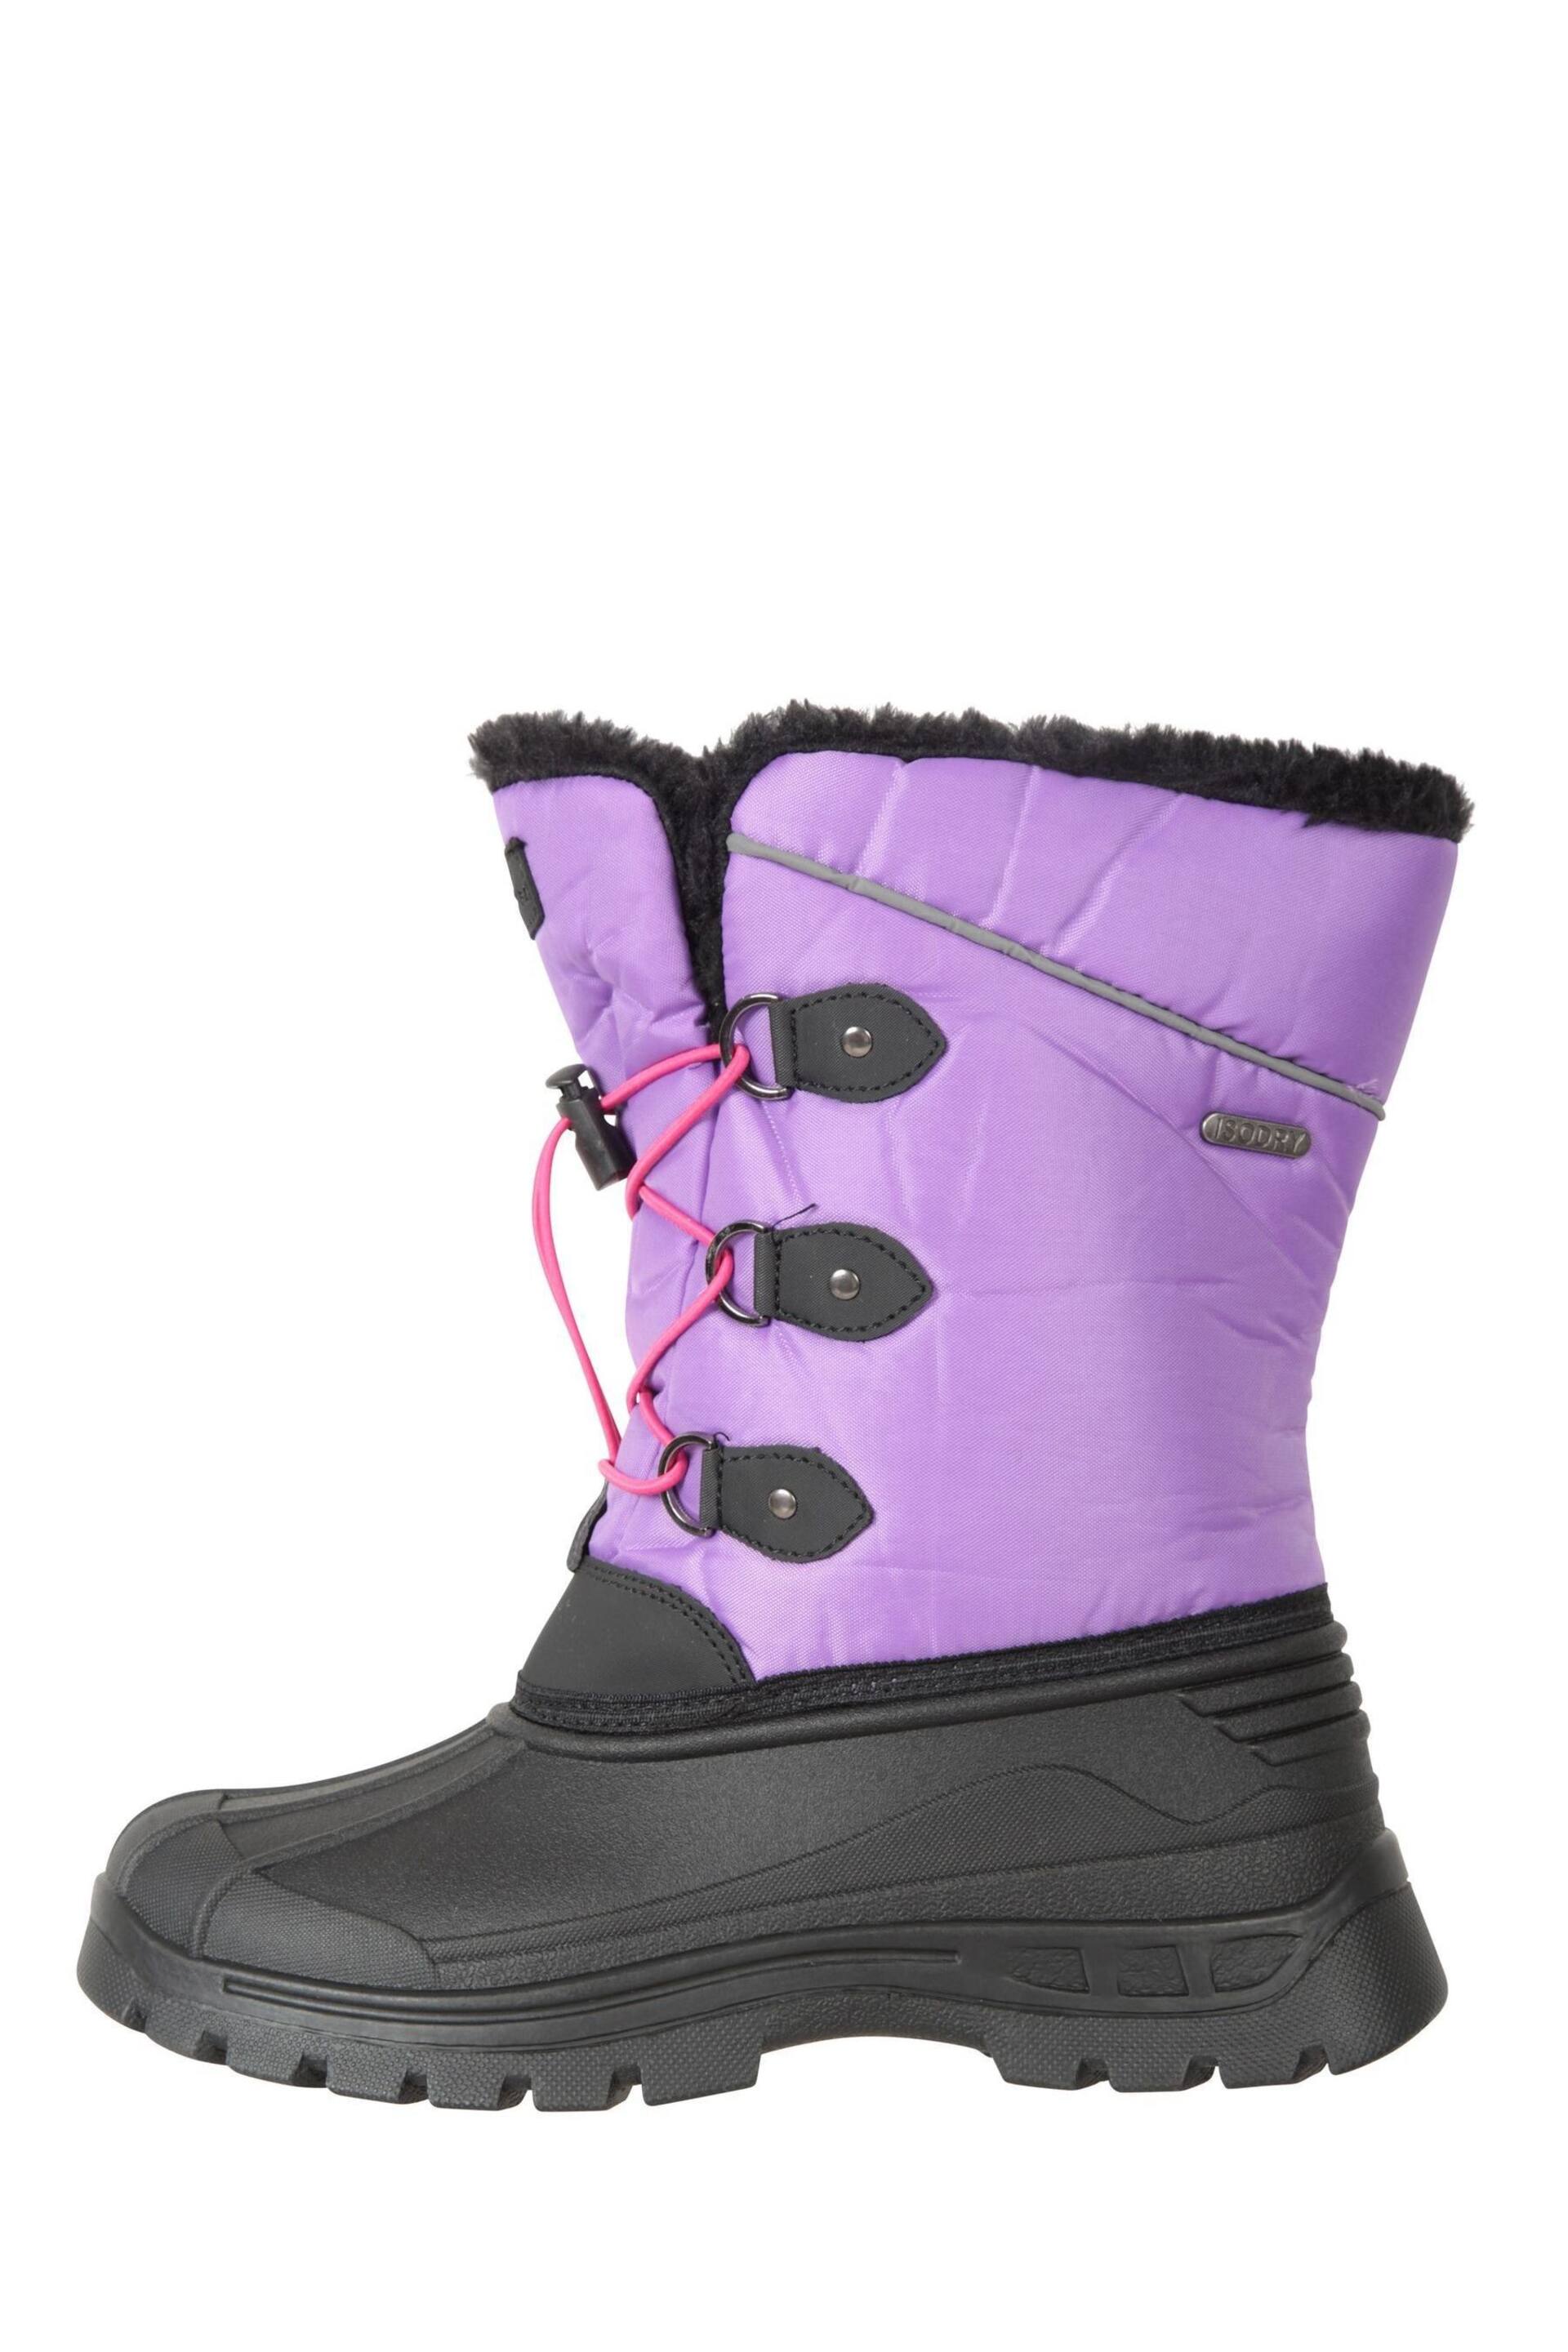 Mountain Warehouse Purple/Black Kids Whistler Sherpa Lined Snow Boots - Image 2 of 3